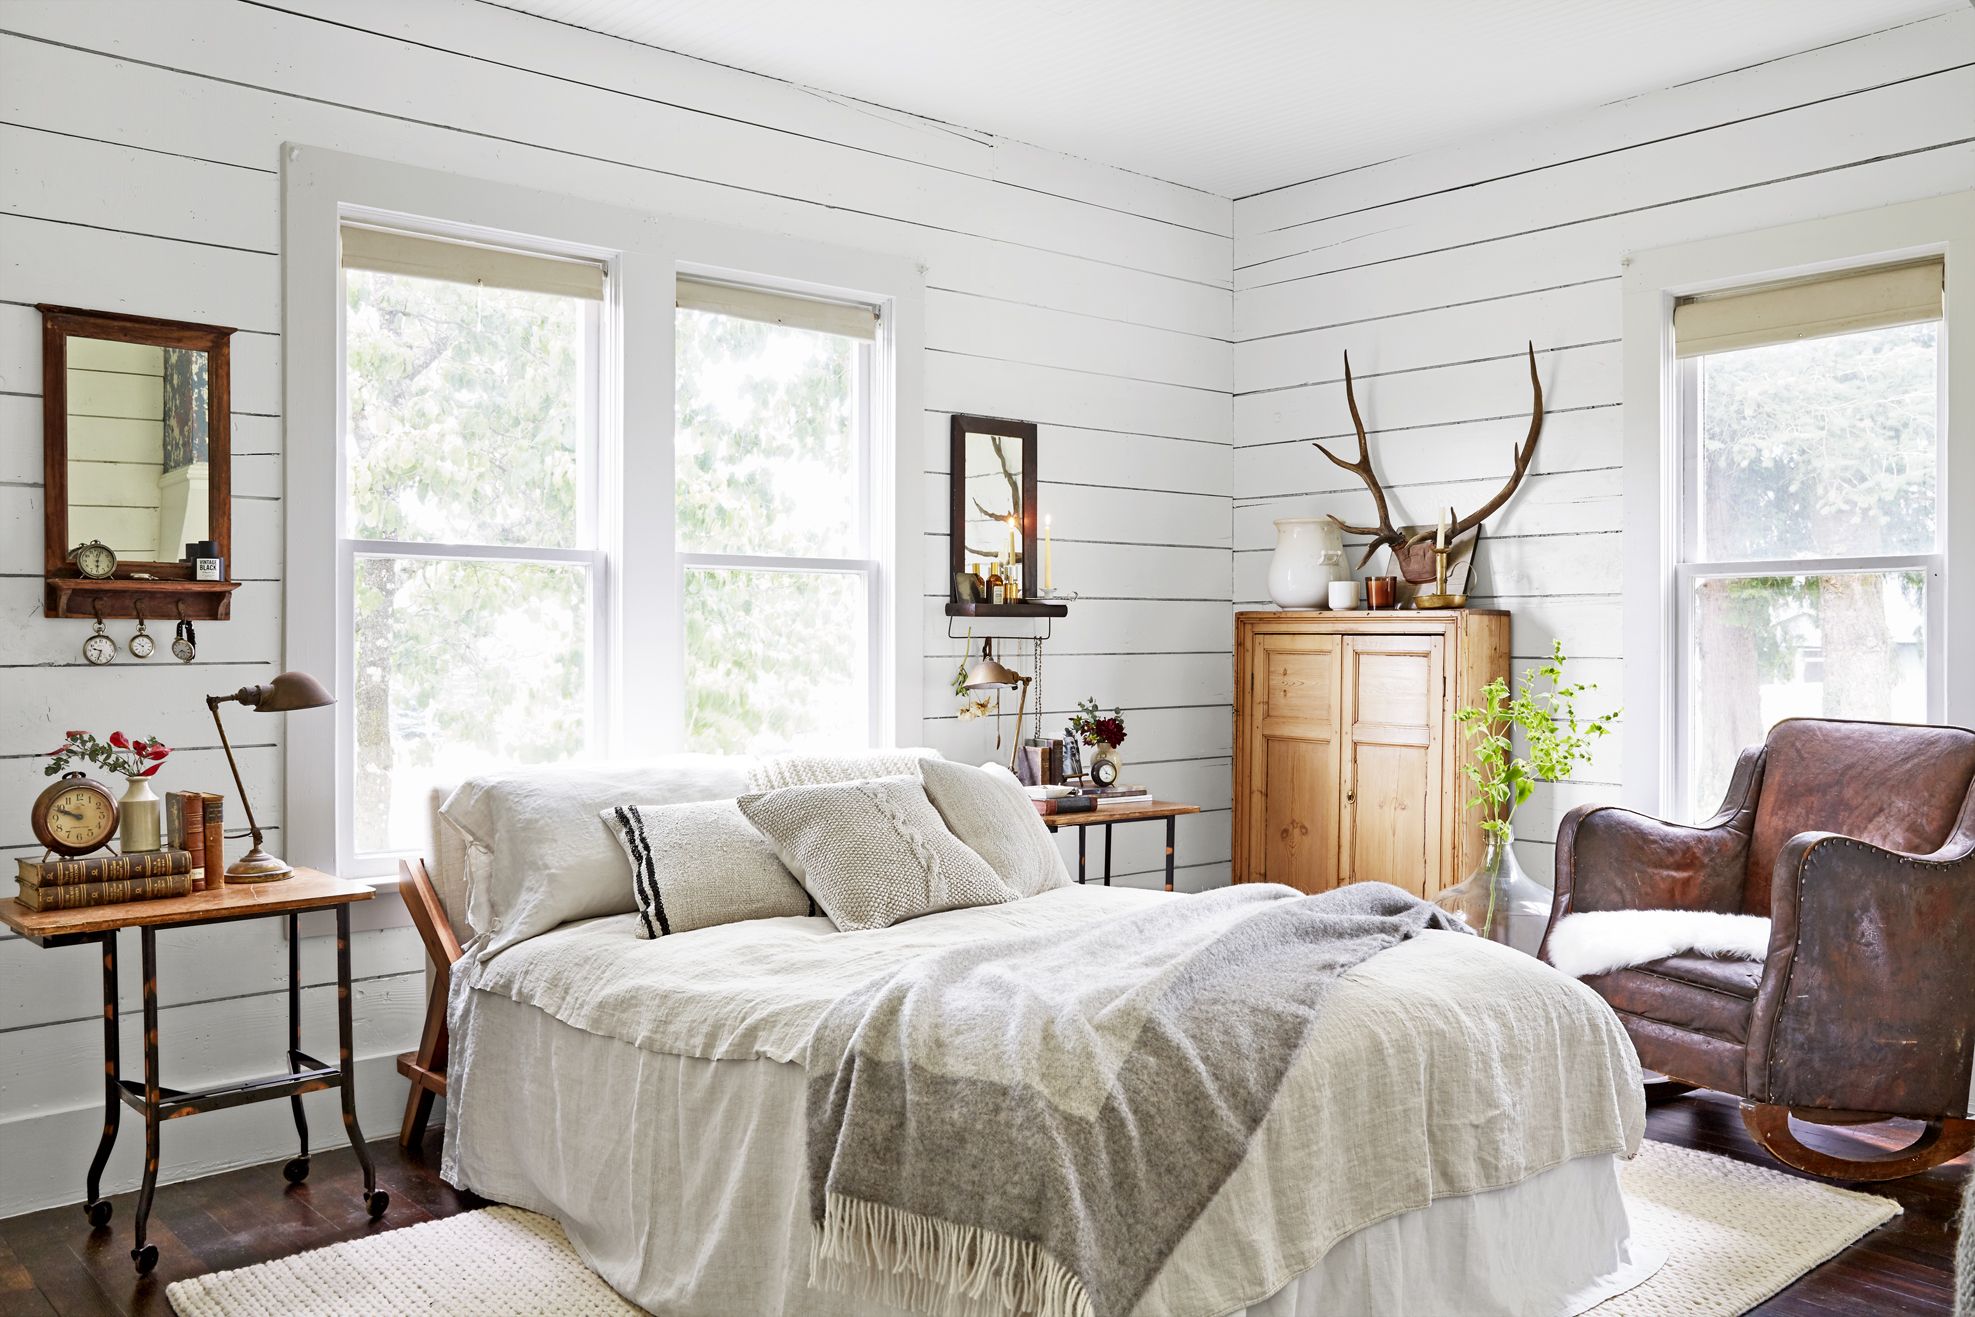 Country Decor For Small Bedroom